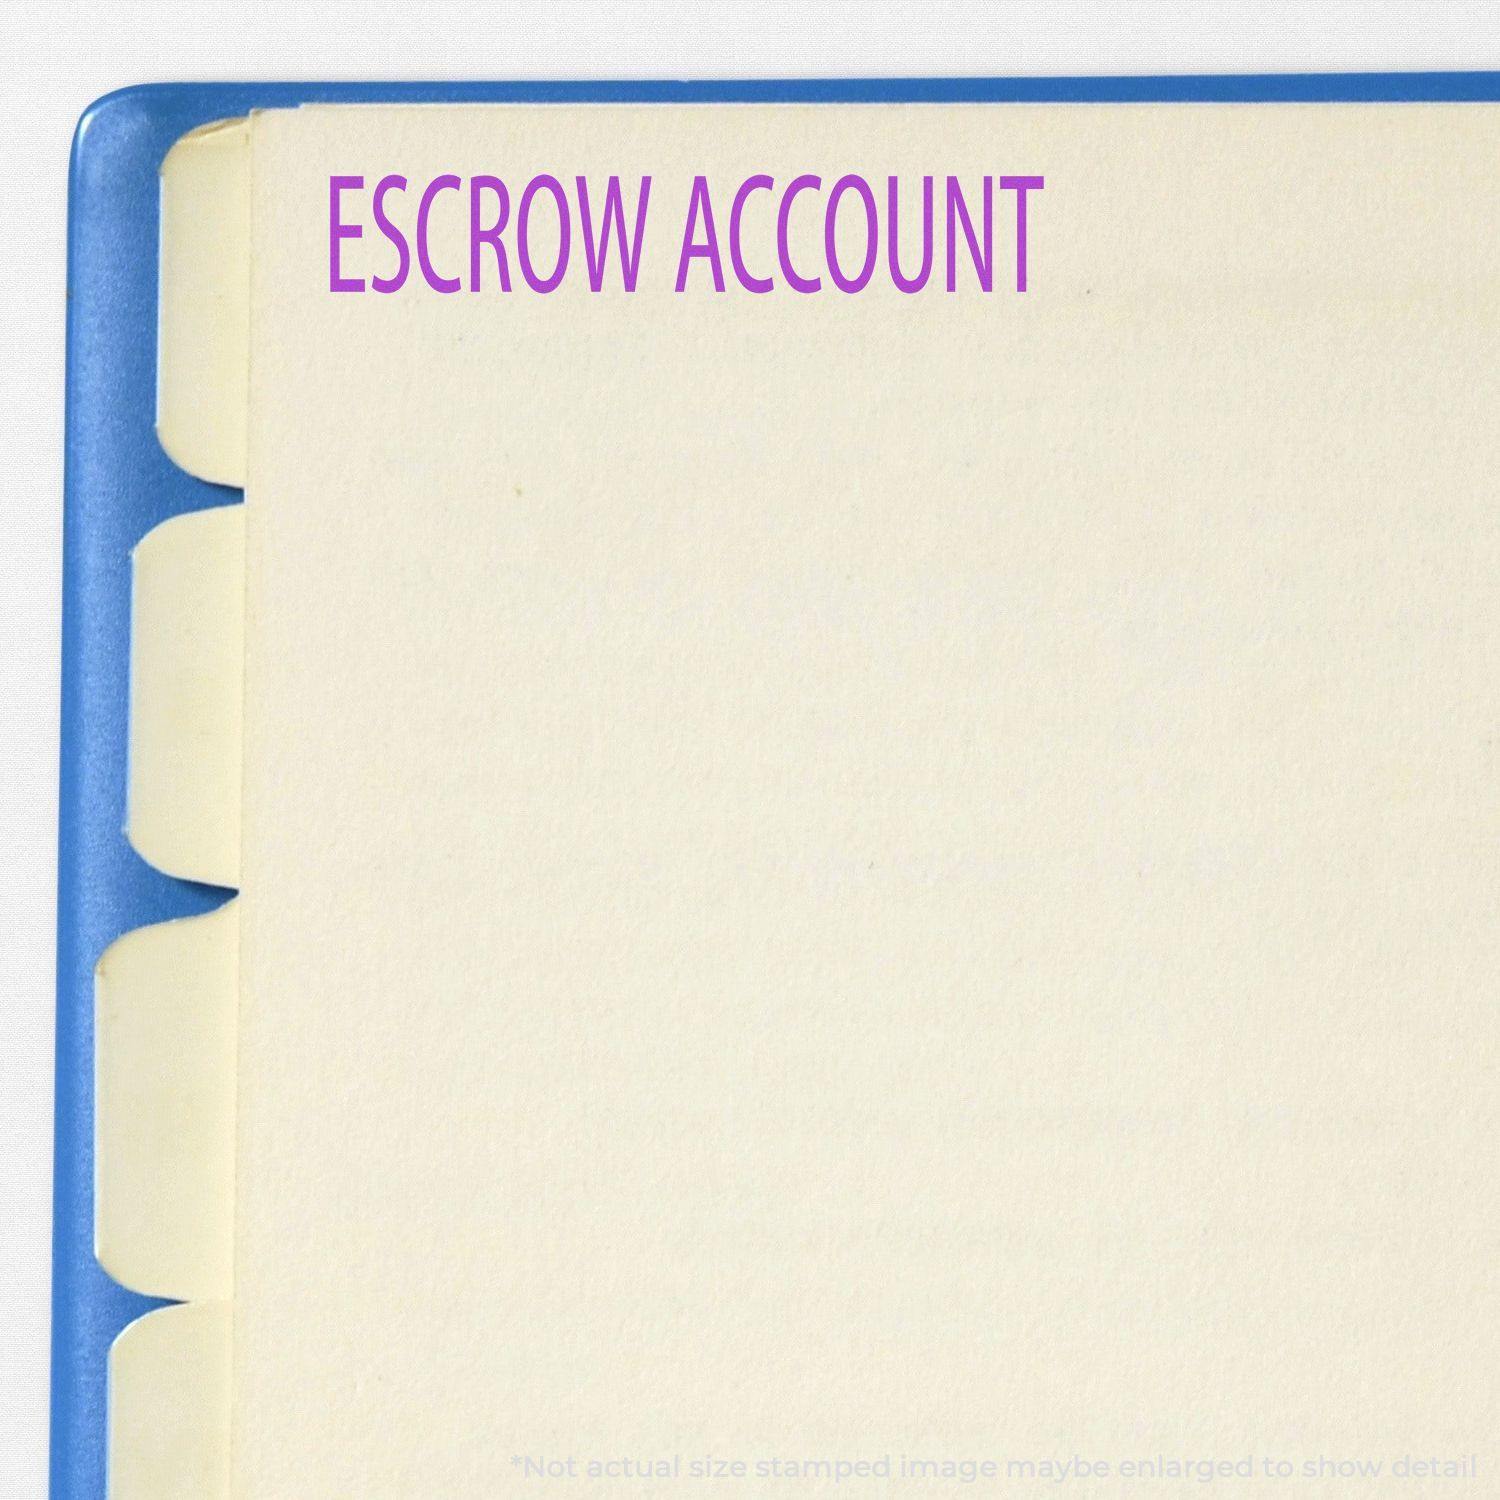 A self-inking stamp with a stamped image showing how the text "ESCROW ACCOUNT" is displayed after stamping.